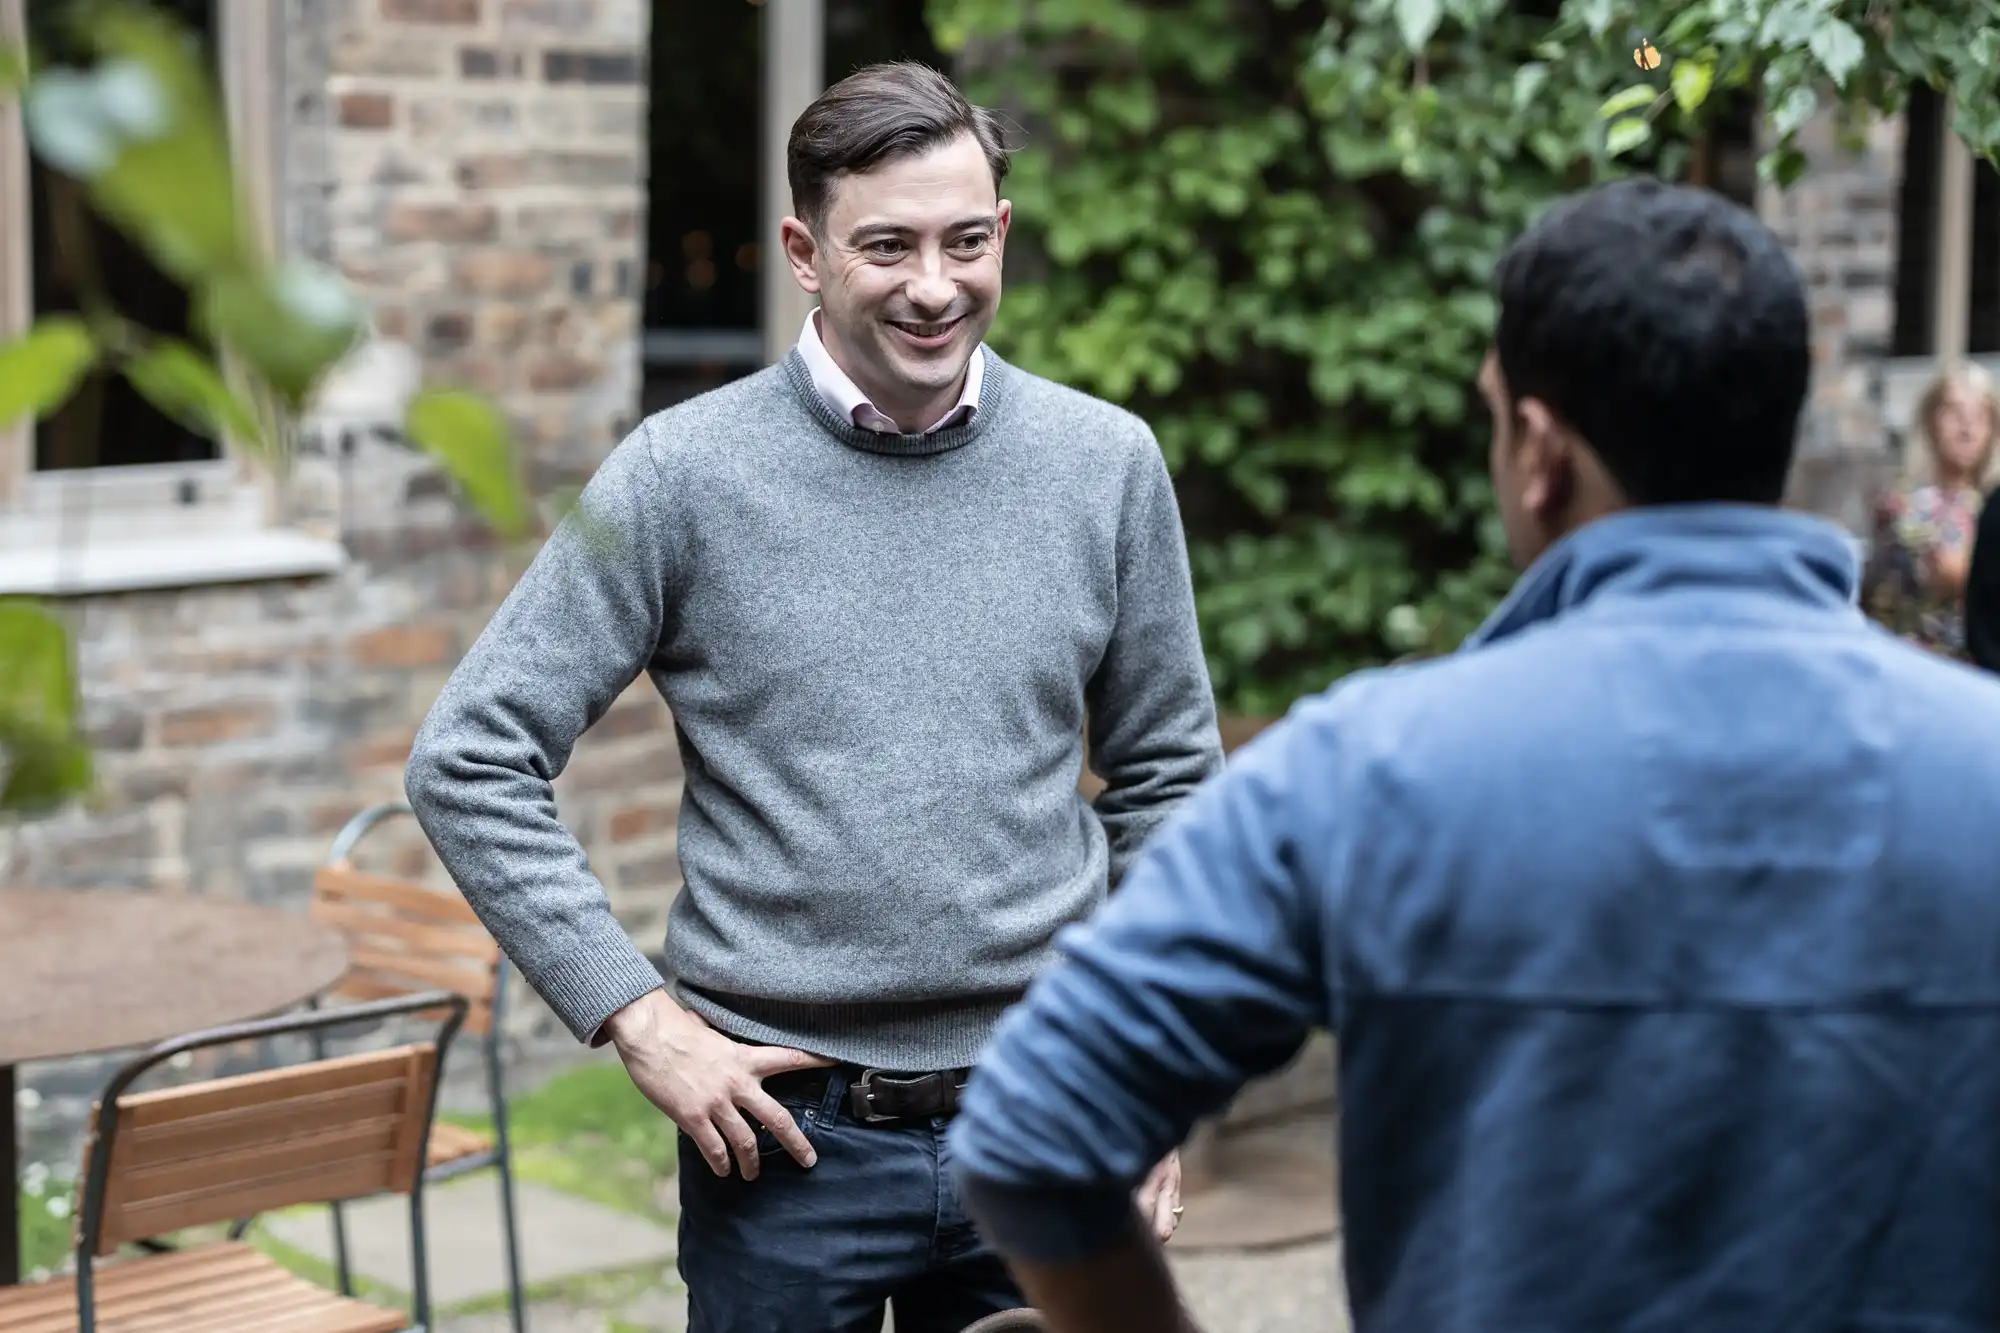 Two men standing and conversing in a courtyard, with one facing the camera and smiling, wearing a grey sweater and jeans.